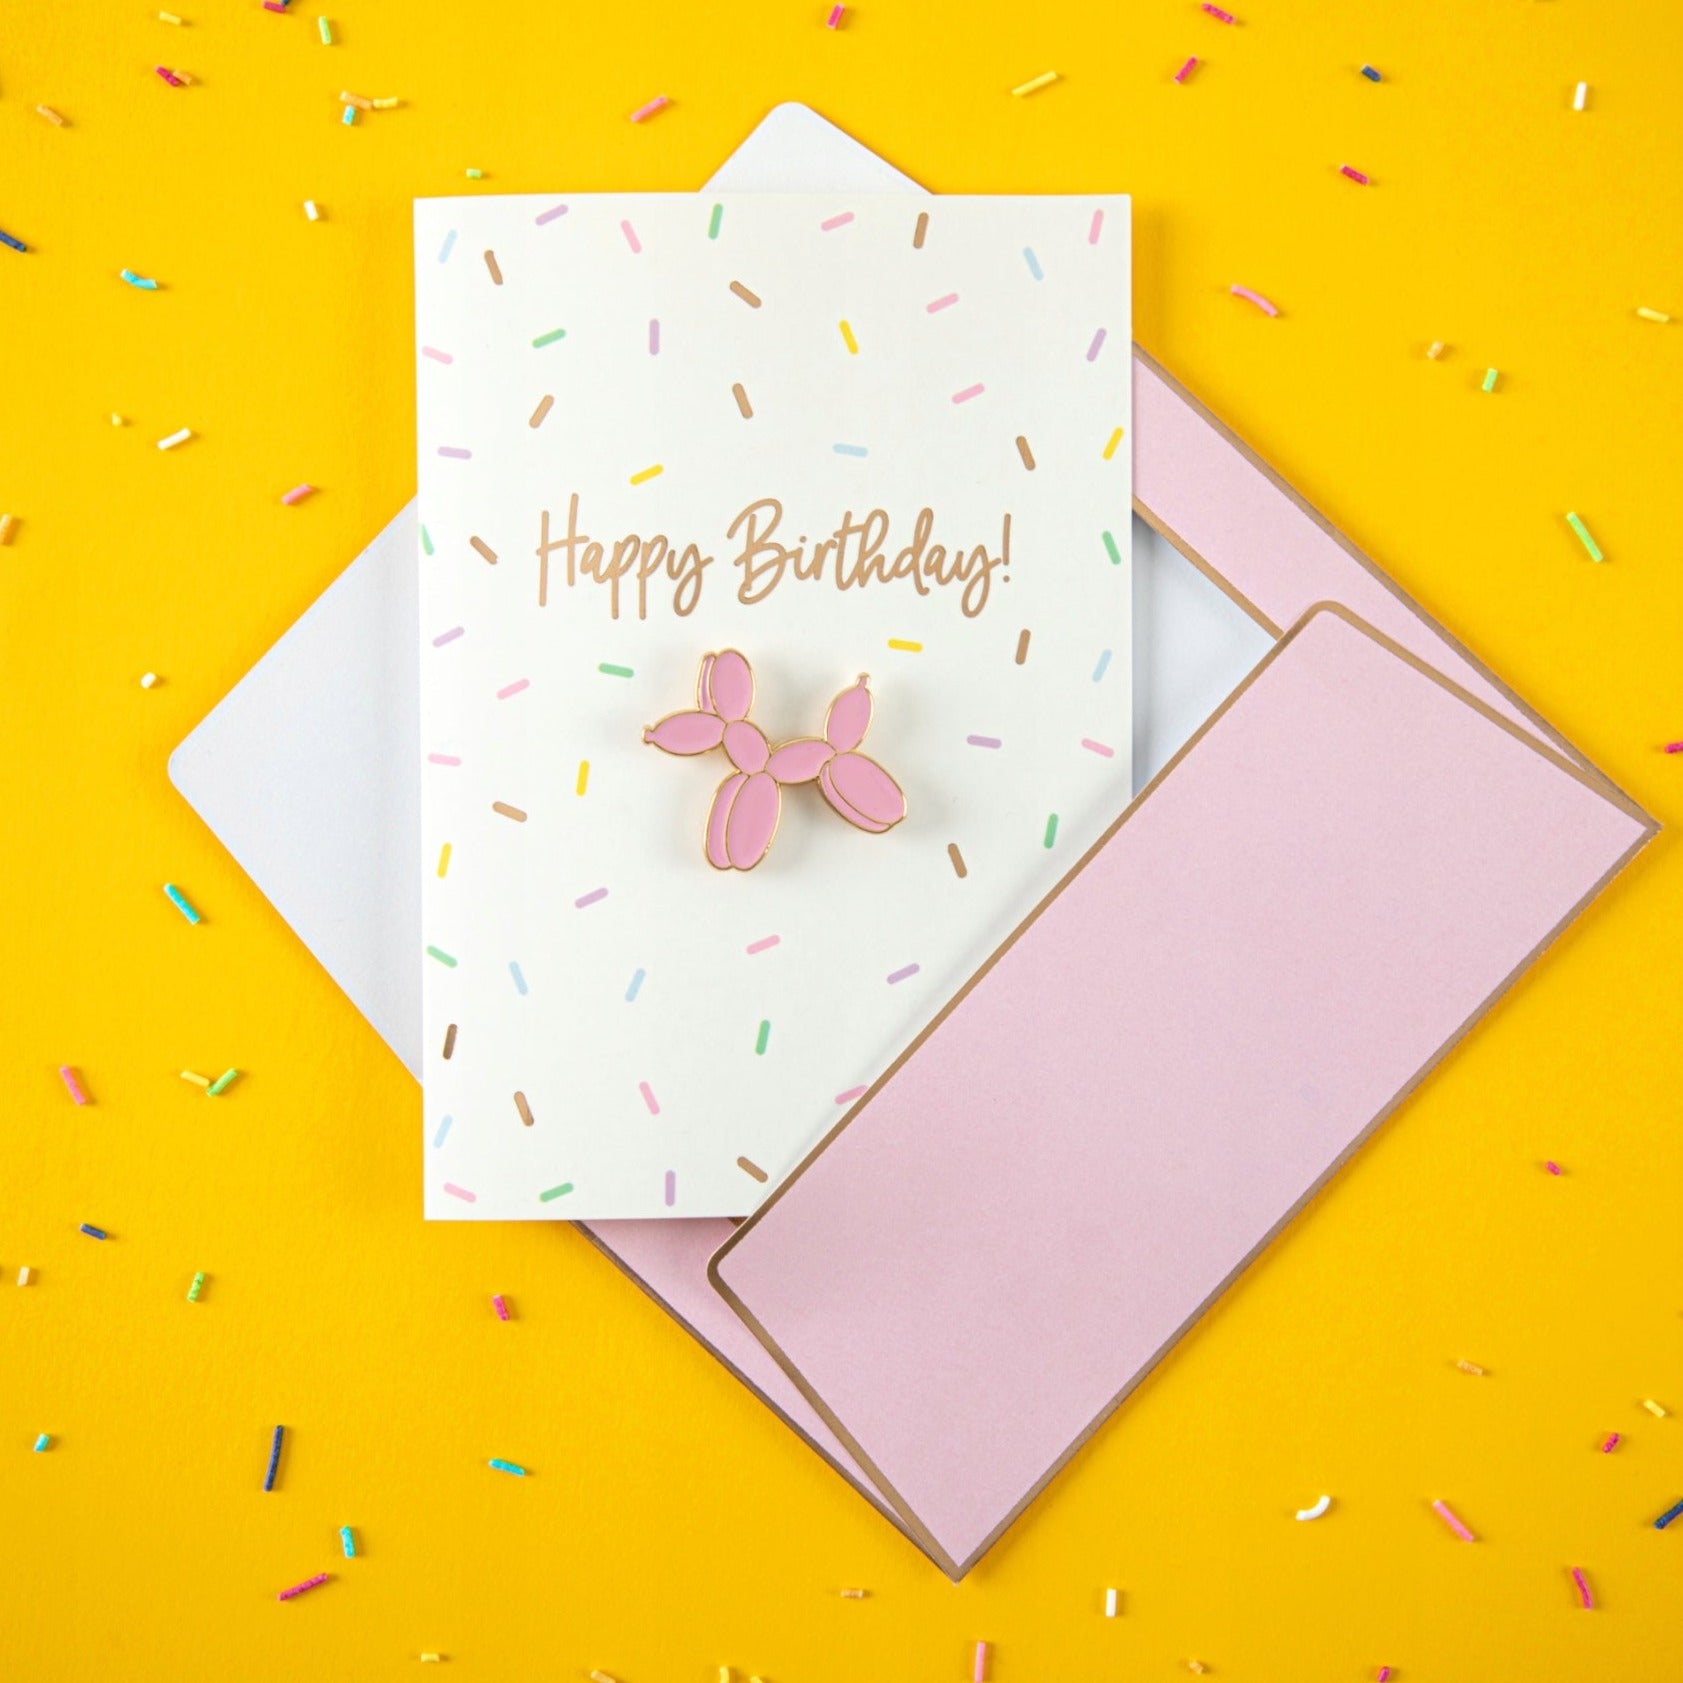 PartyDeco: Greeting card with PIN Balloon Dog